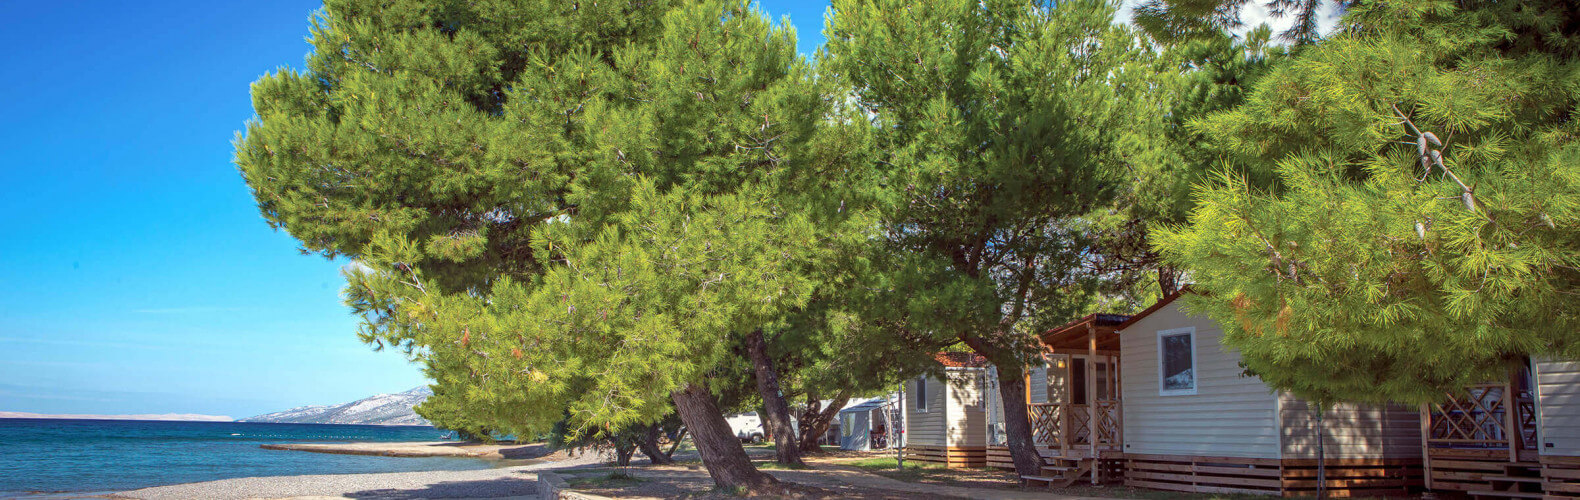 Camping Paklenica - mobile homes